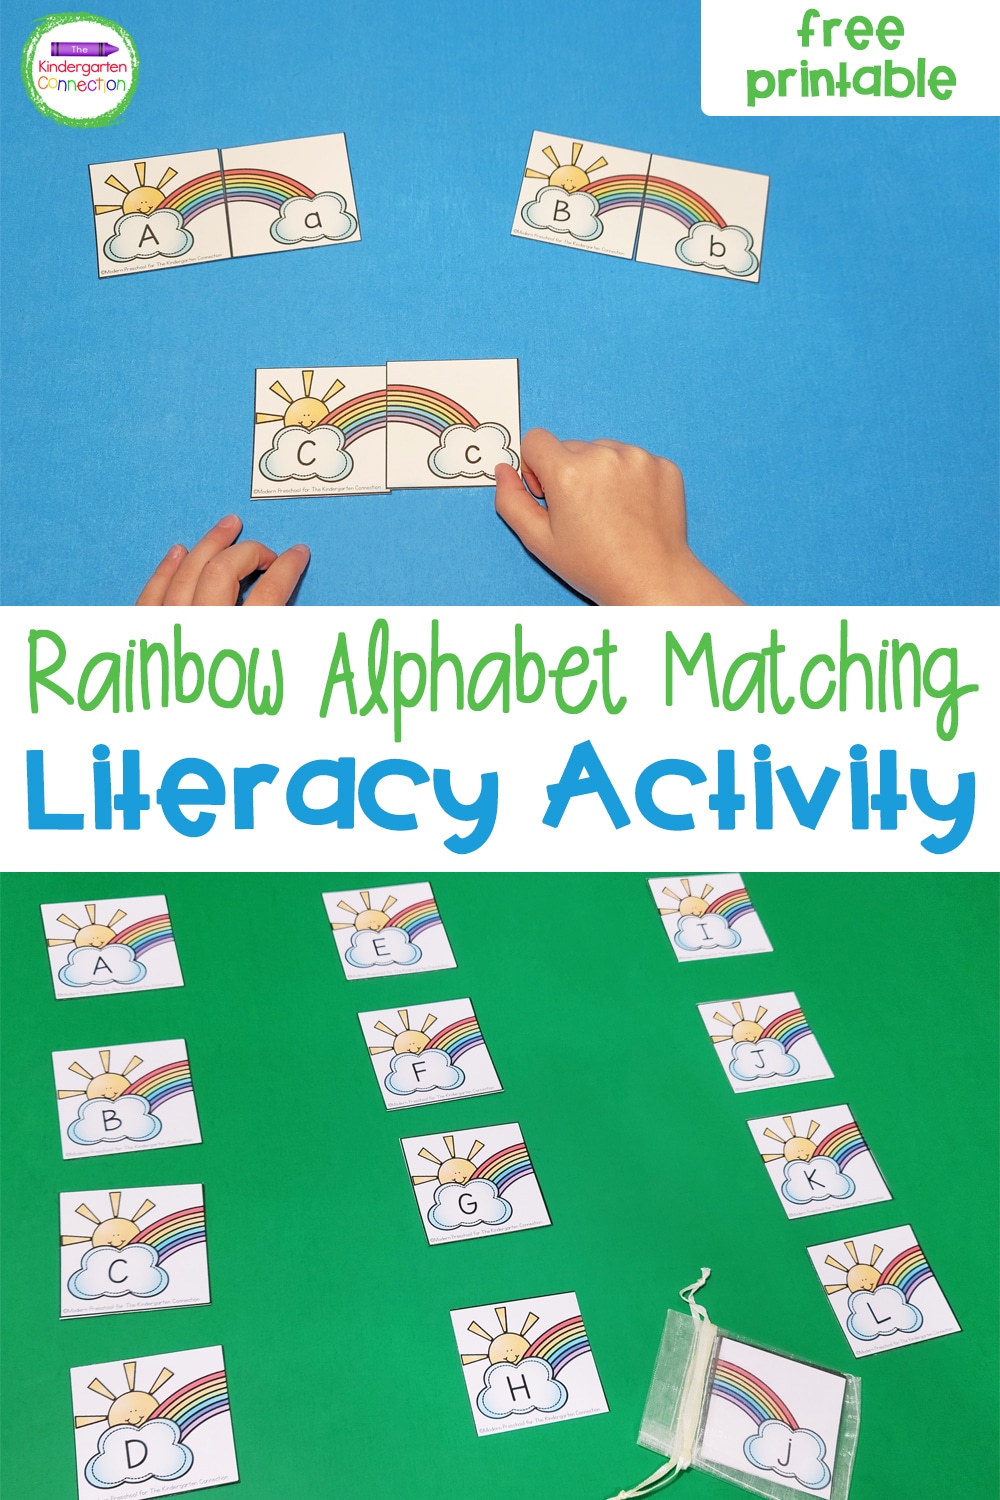 Match uppercase and lowercase letters, play memory, and more with this fun and free Rainbow Alphabet Matching Game!